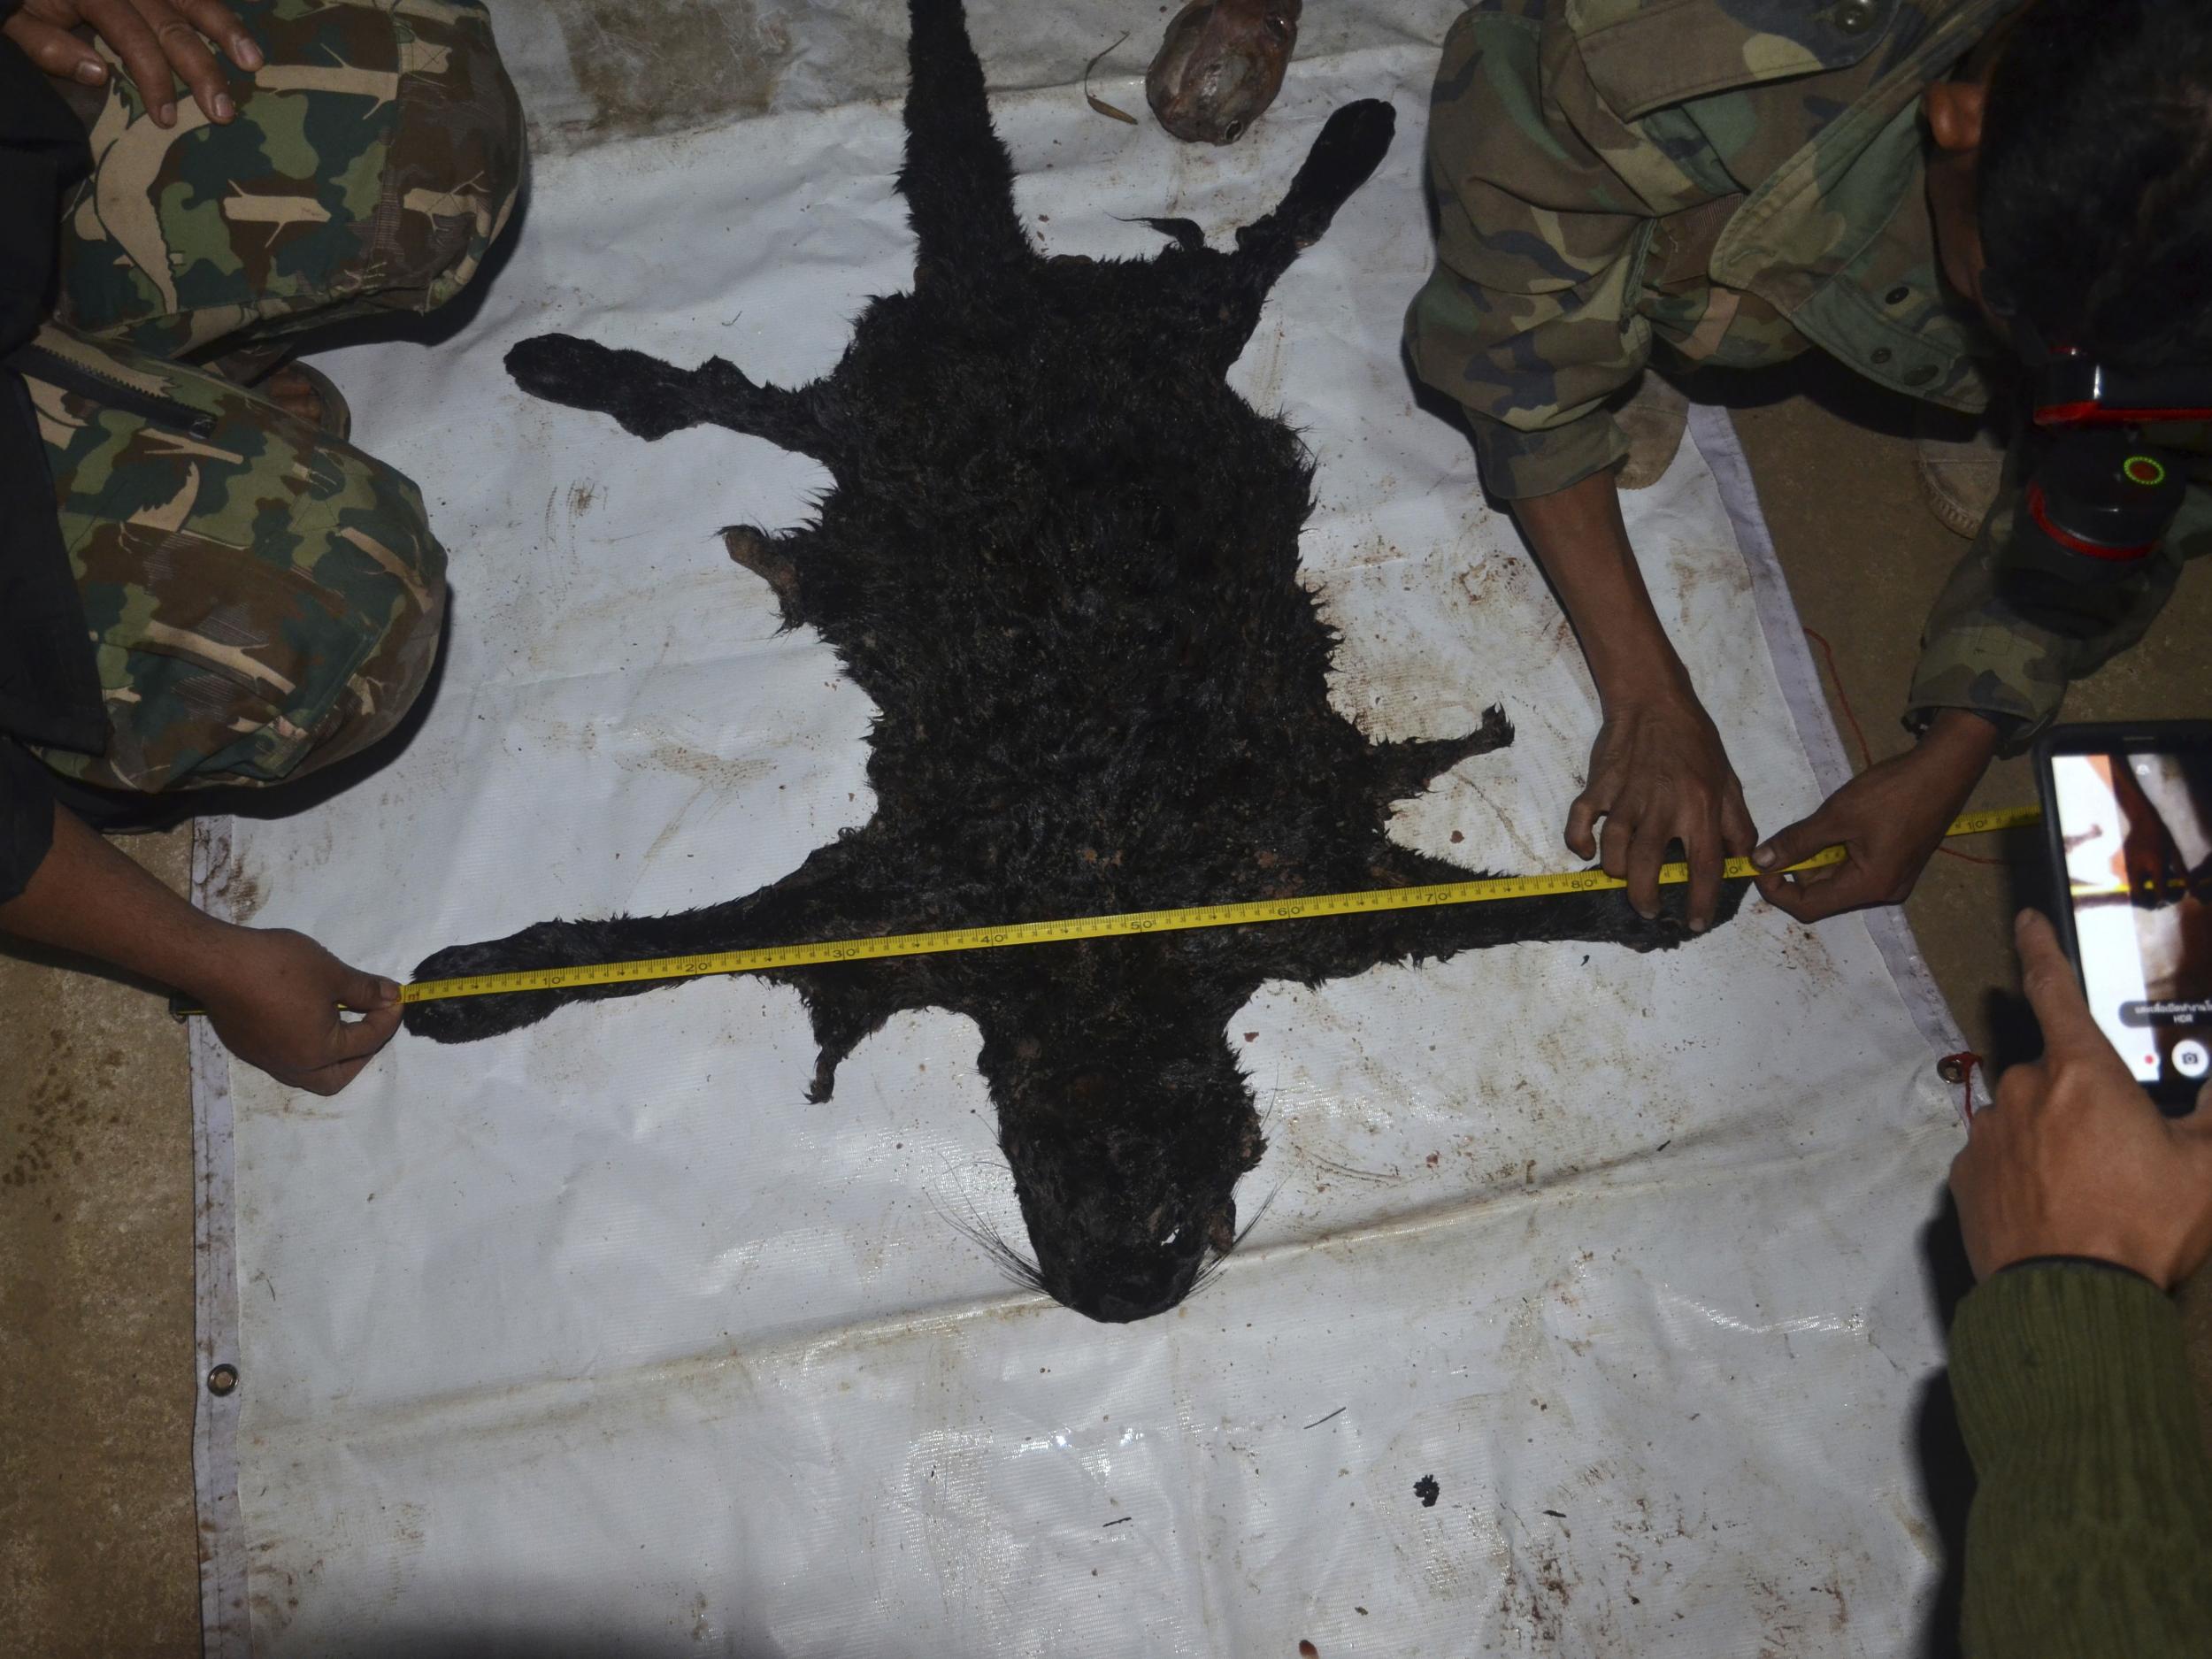 Officials measure the pelt of a black panther in the Thungyai Naresuan Wildlife Sanctuary